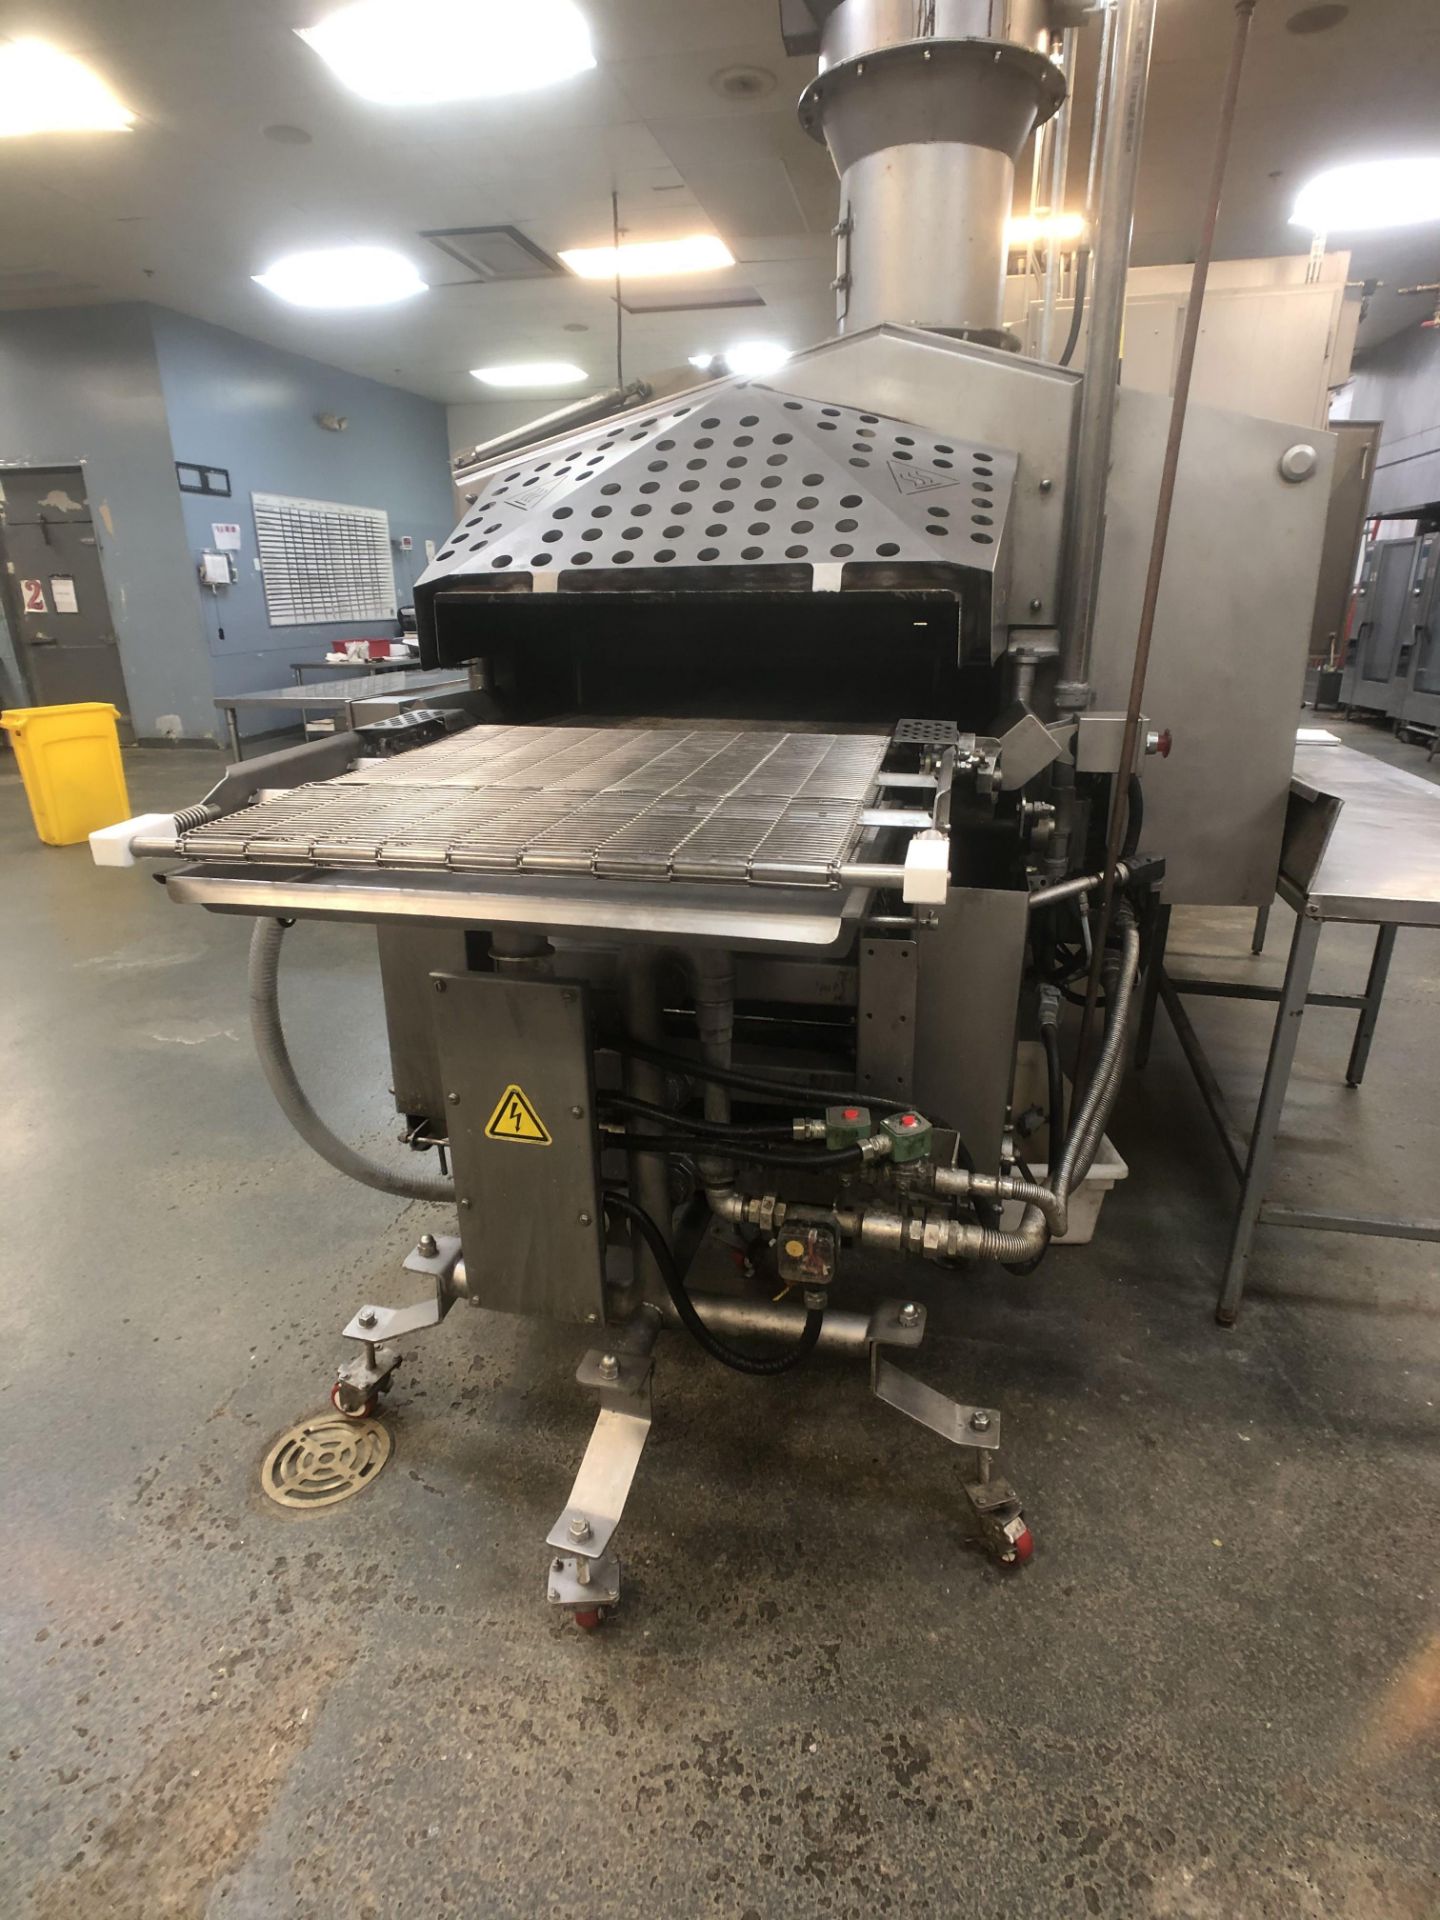 2019 Unitherm Food Systems 24" Flame Grill with Preheat, Model FG-24-8B-P, S/N FLGR-2485, Includes - Image 6 of 19